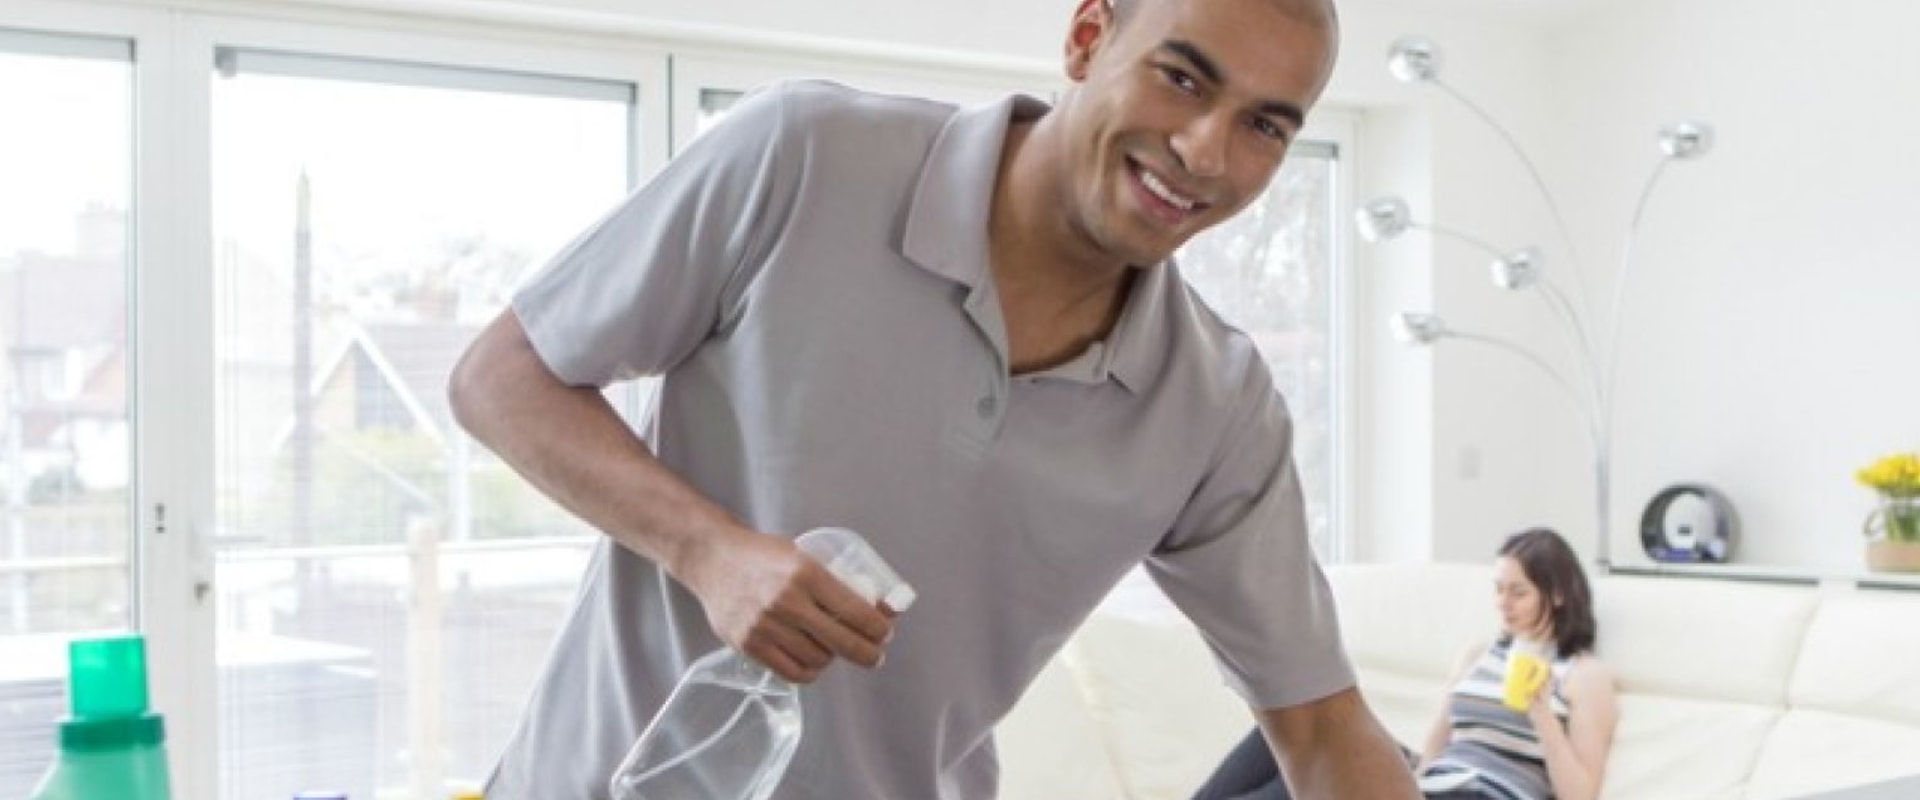 What are the eye health benefits of regular house cleaning?